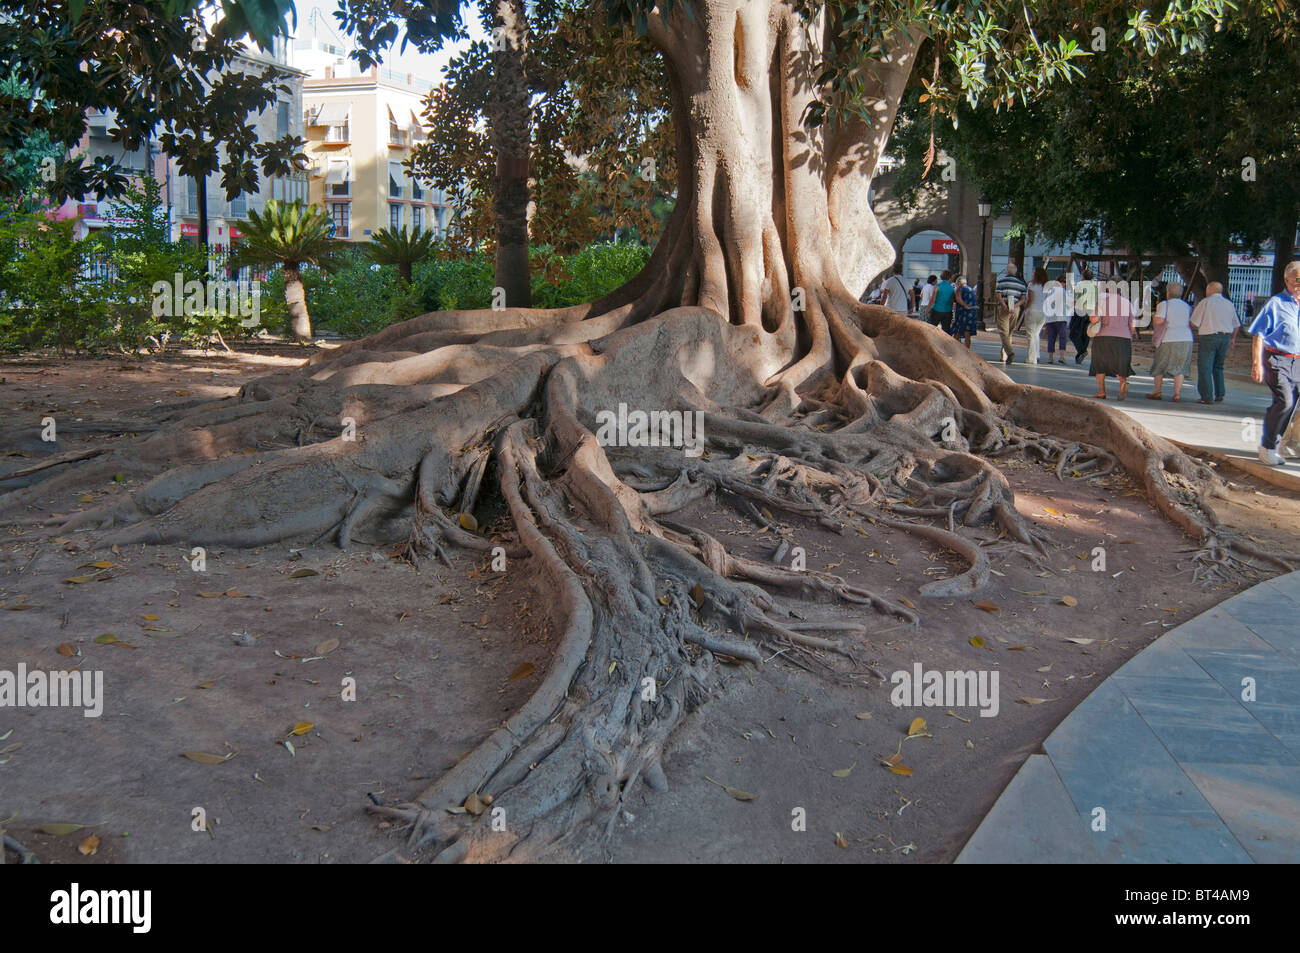 Ancient knarled tree with extensive roots in a public park in the centre of the city of Murcia, South Eastern Spain Stock Photo